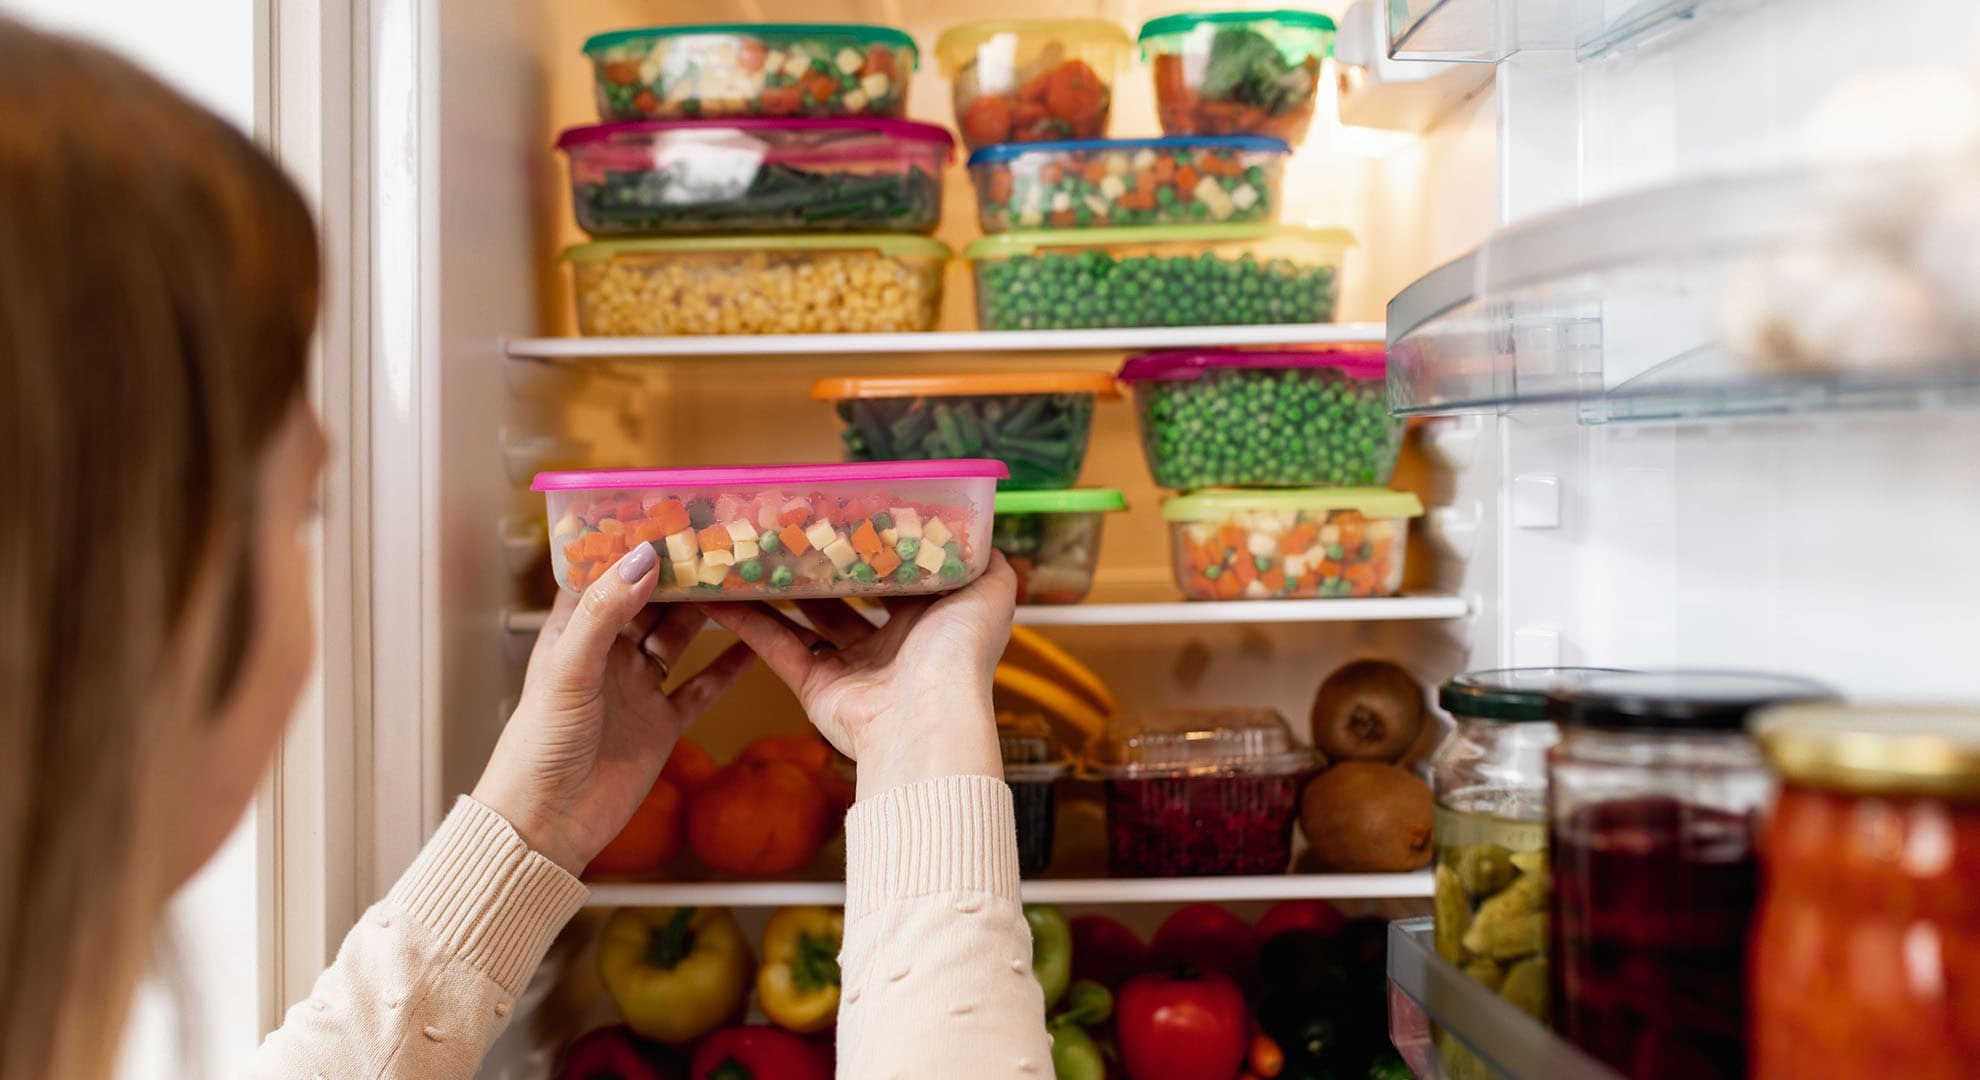 A person putting well stored food into a fridge